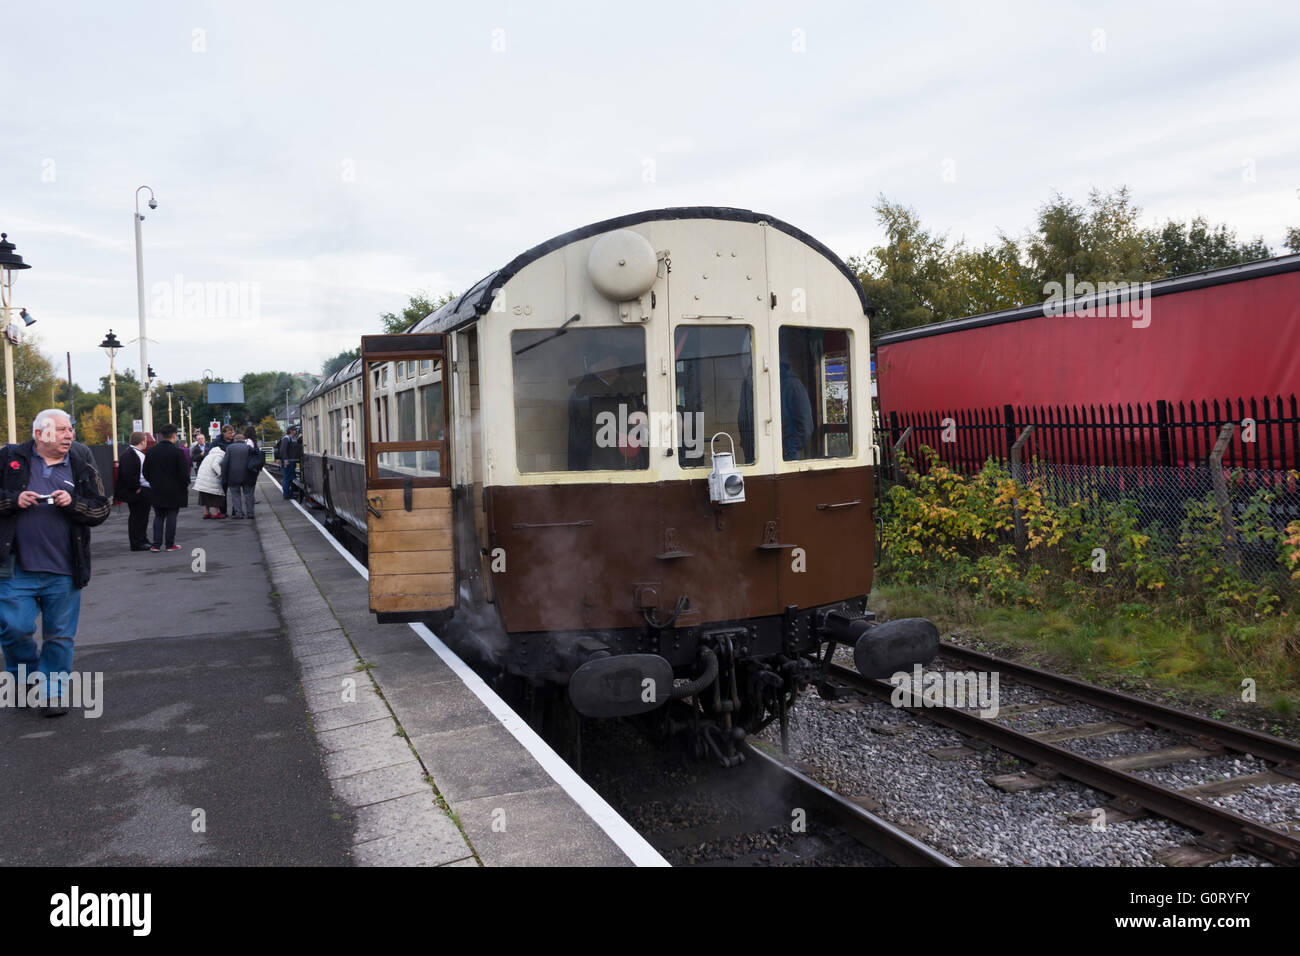 GWR autocoach at Heywood on the East Lancashire Railway pulled by former Great Western Railway pannier tank engine 6430. Stock Photo